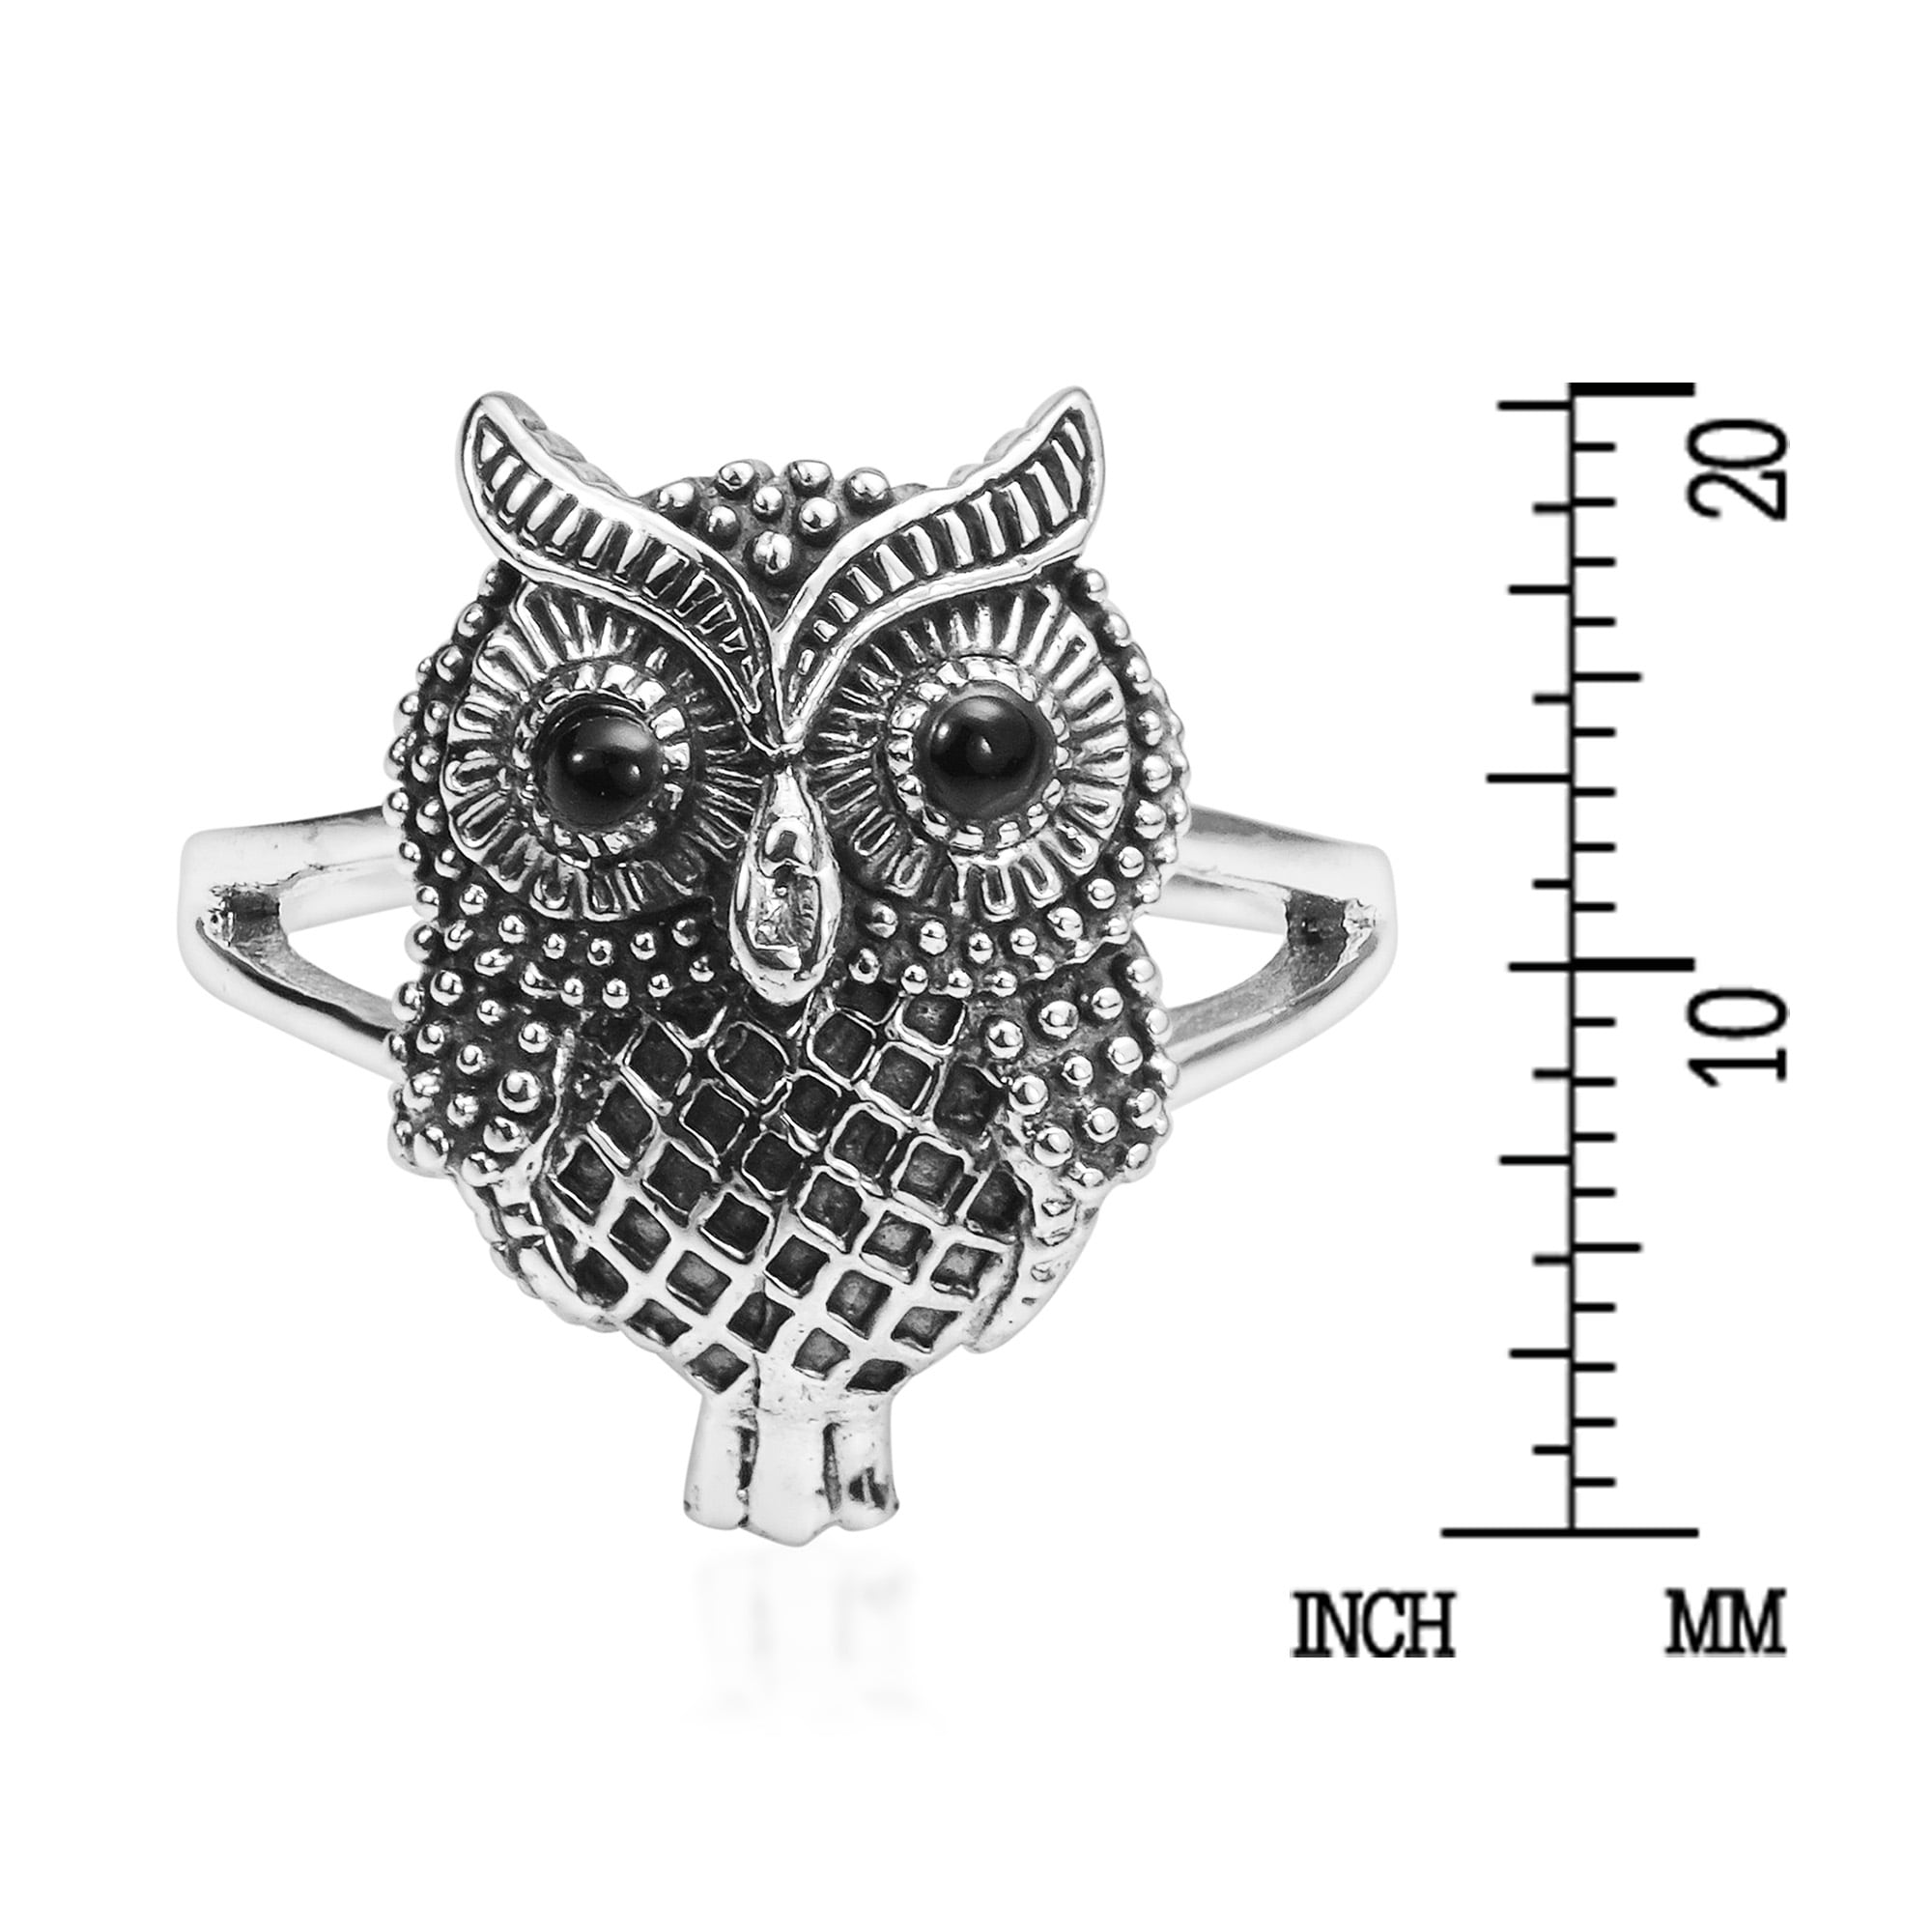 NEW Sterling Silver 925 Ornate Marcasite Owl Animal Ring